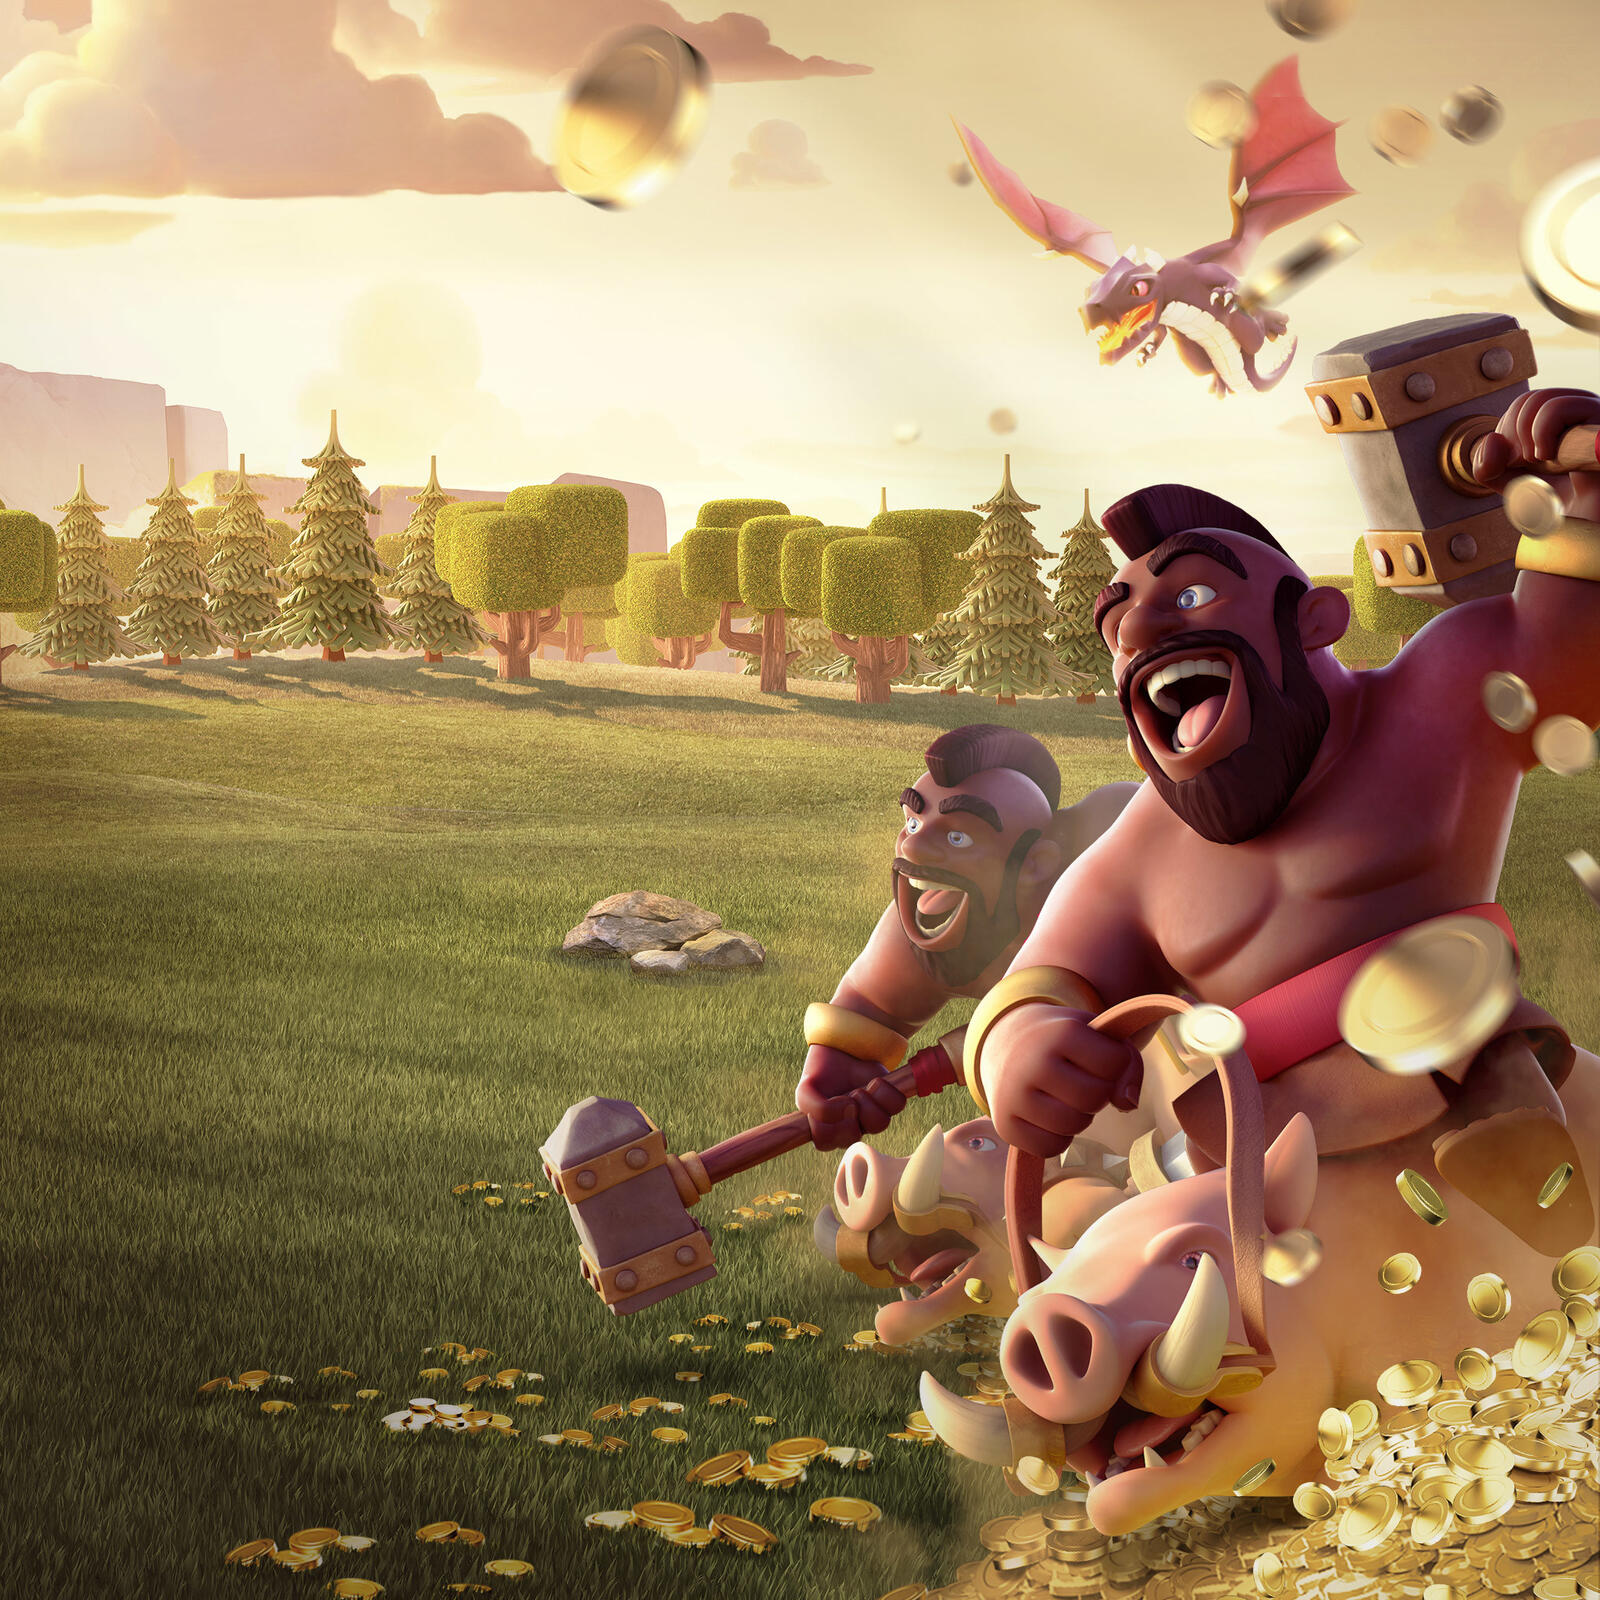 Wallpapers Clash Of Clans supercell games on the desktop